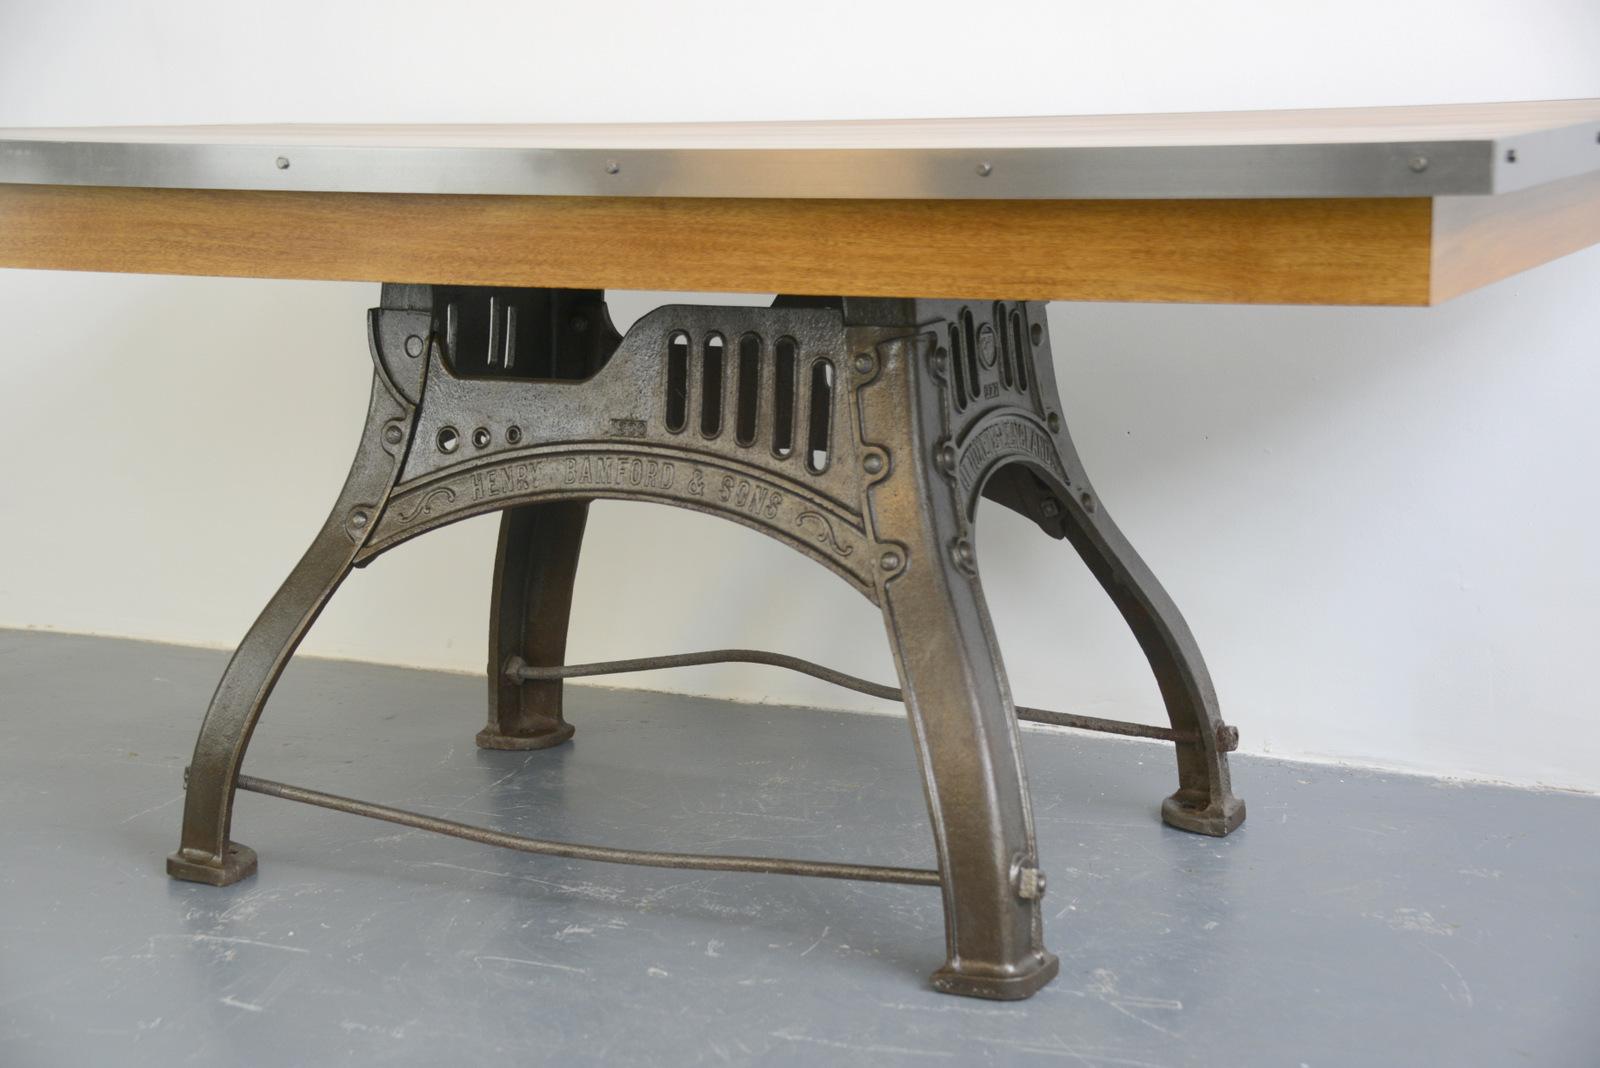 English industrial table by Bamfords, circa 1910

- Will seat 6-8
- Cast iron base
- Beautiful brandning on all 4 sides
- Steel edging 
- Solid hardwoood top
- The top is made from idigbo 
- The top has been finished with numerous coats of